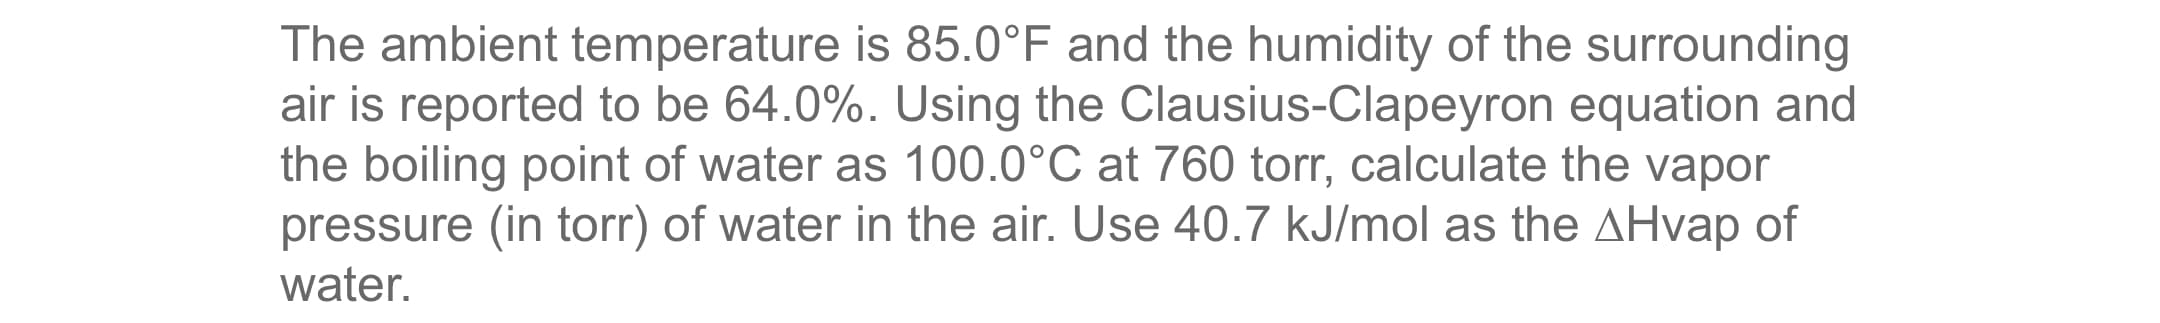 The ambient temperature is 85.0°F and the humidity of the surrounding
air is reported to be 64.0%. Using the Clausius-Clapeyron equation and
the boiling point of water as 100.0°C at 760 torr, calculate the vapor
pressure (in torr) of water in the air. Use 40.7 kJ/mol as the AHvap of
water.
